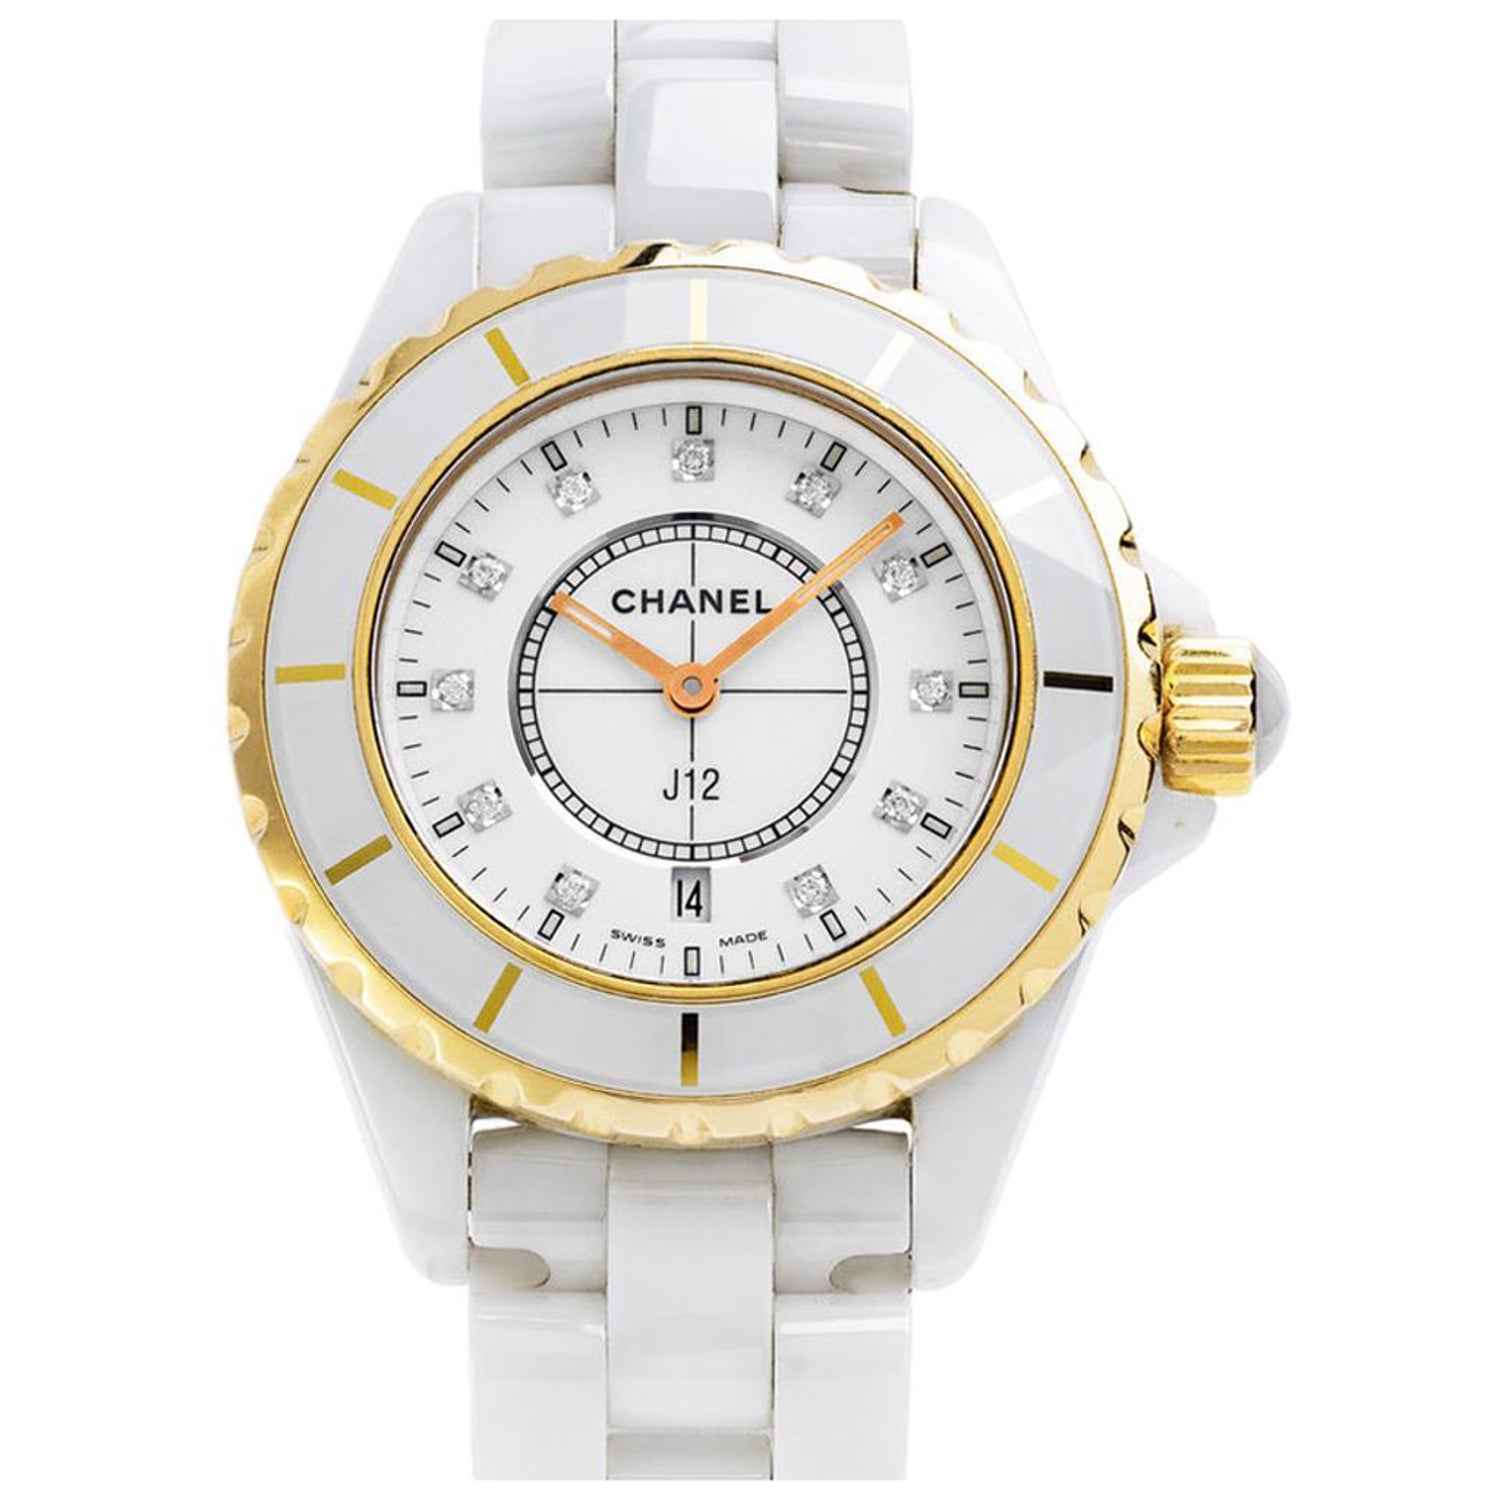 Chanel J12 White Ceramic and 18K Yellow Gold Watch with Diamond Markers